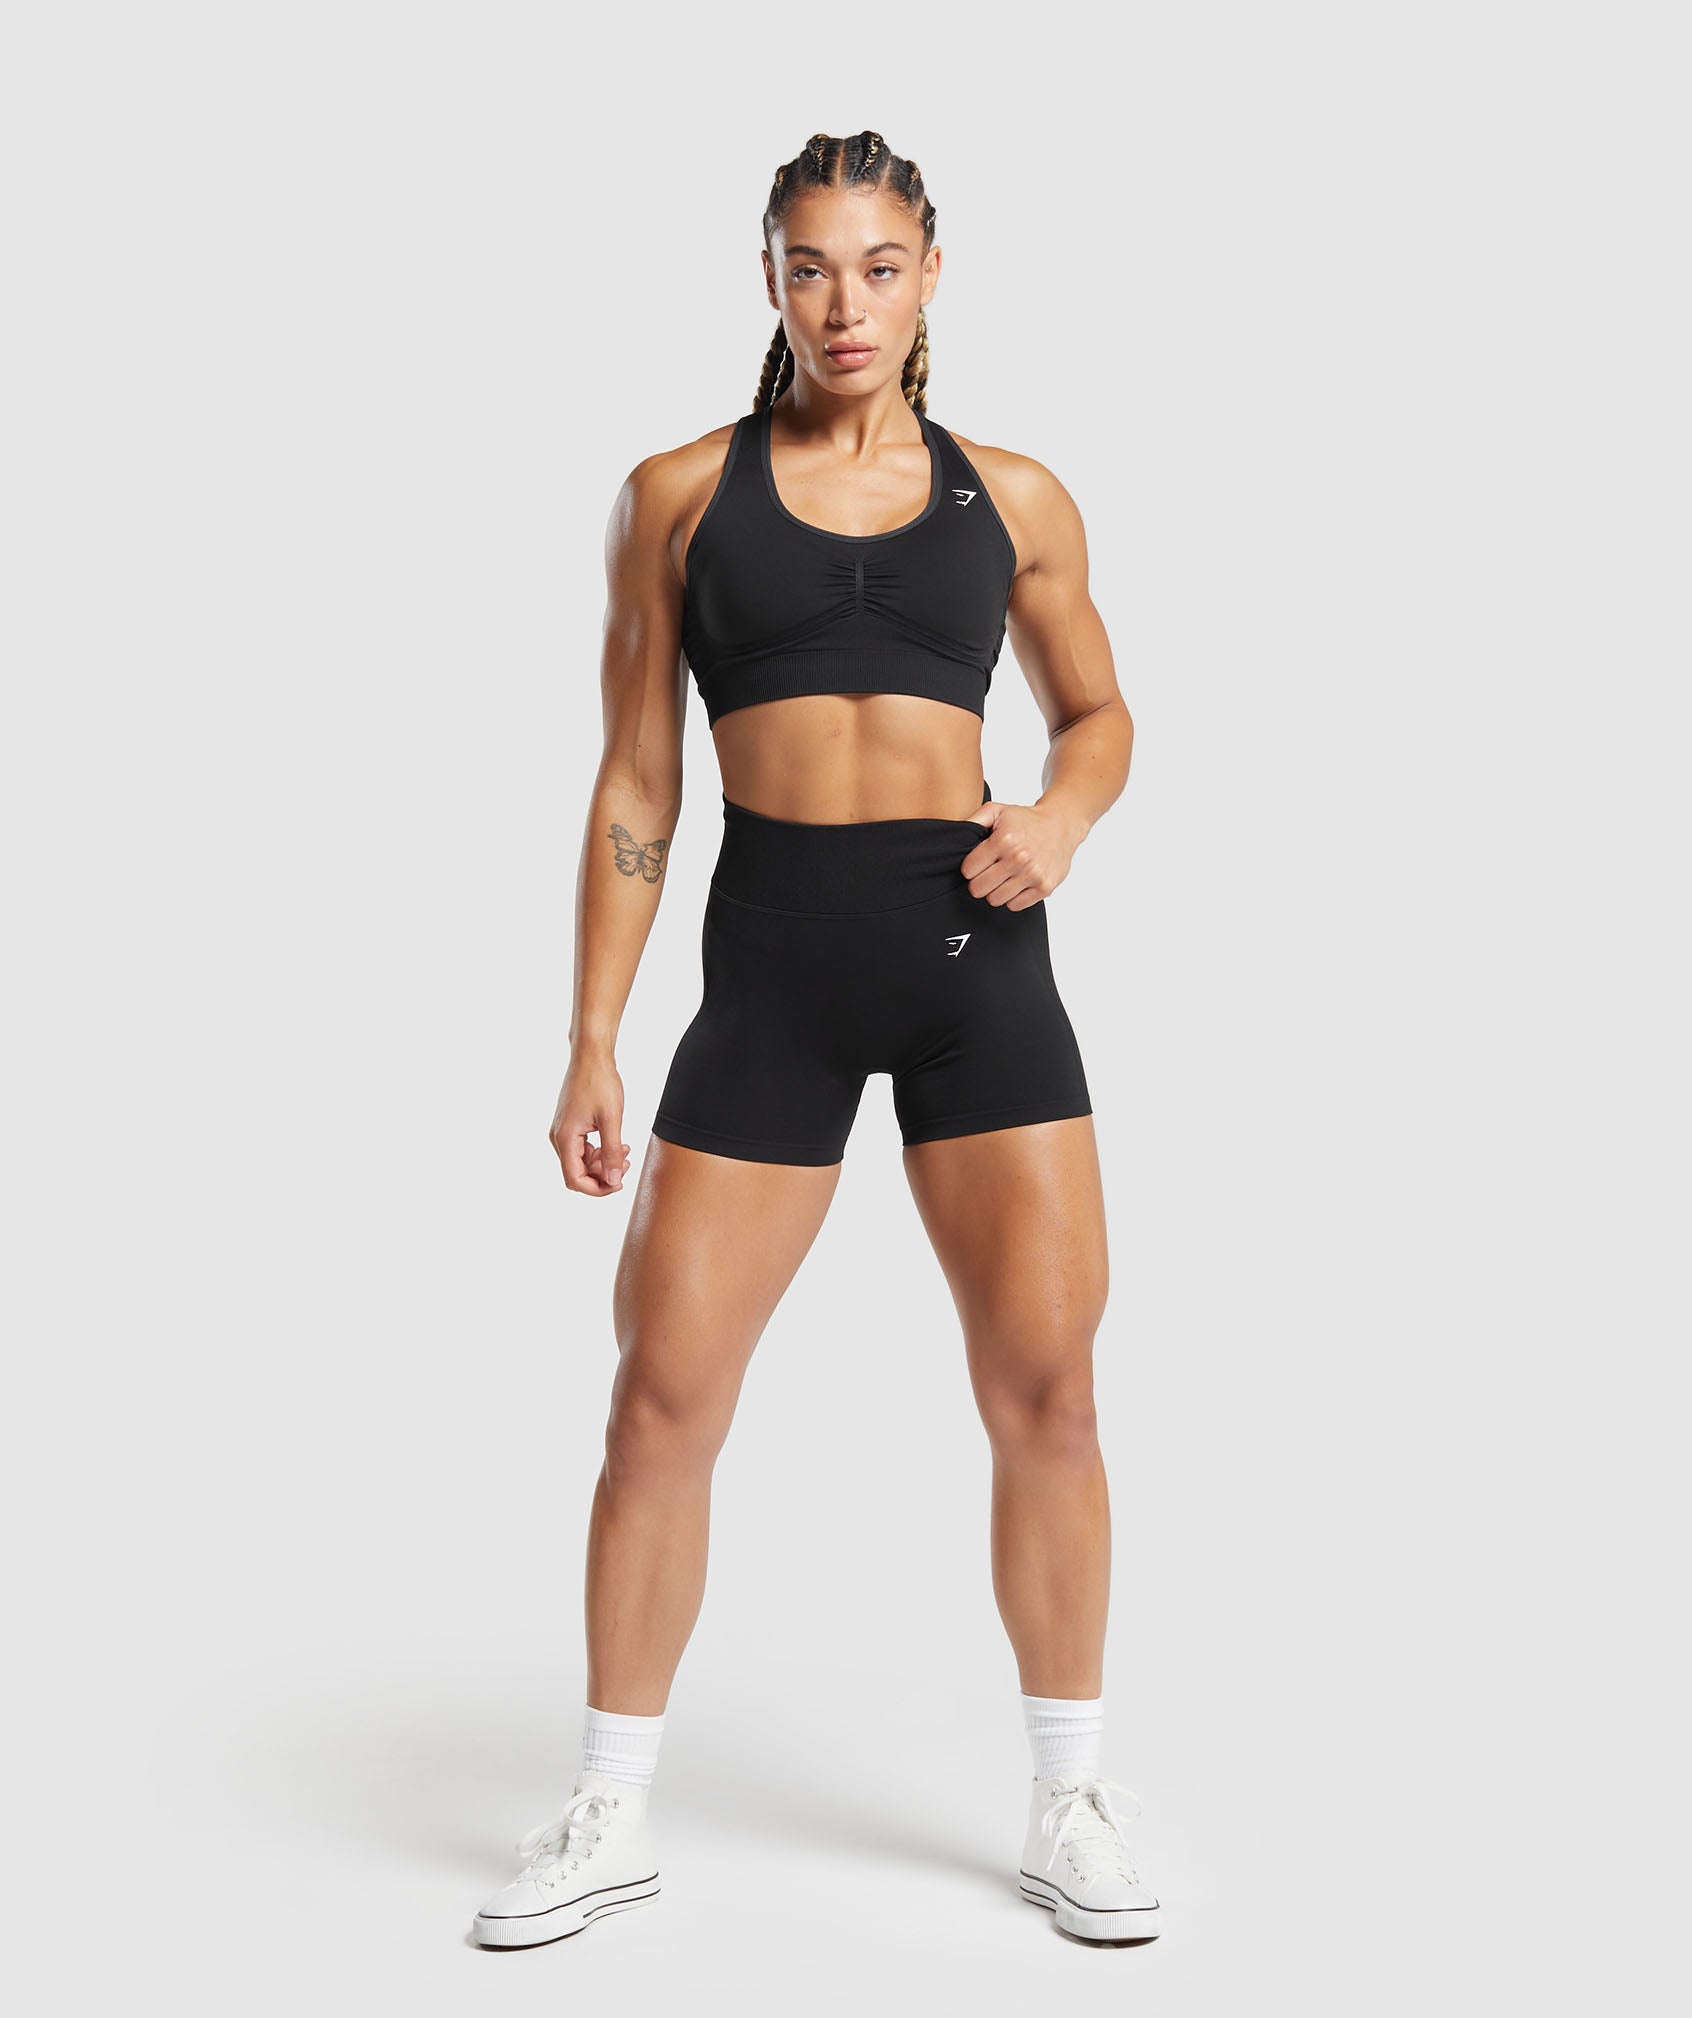 Lift Contour Seamless Shorts in Black/Black Marl - view 5